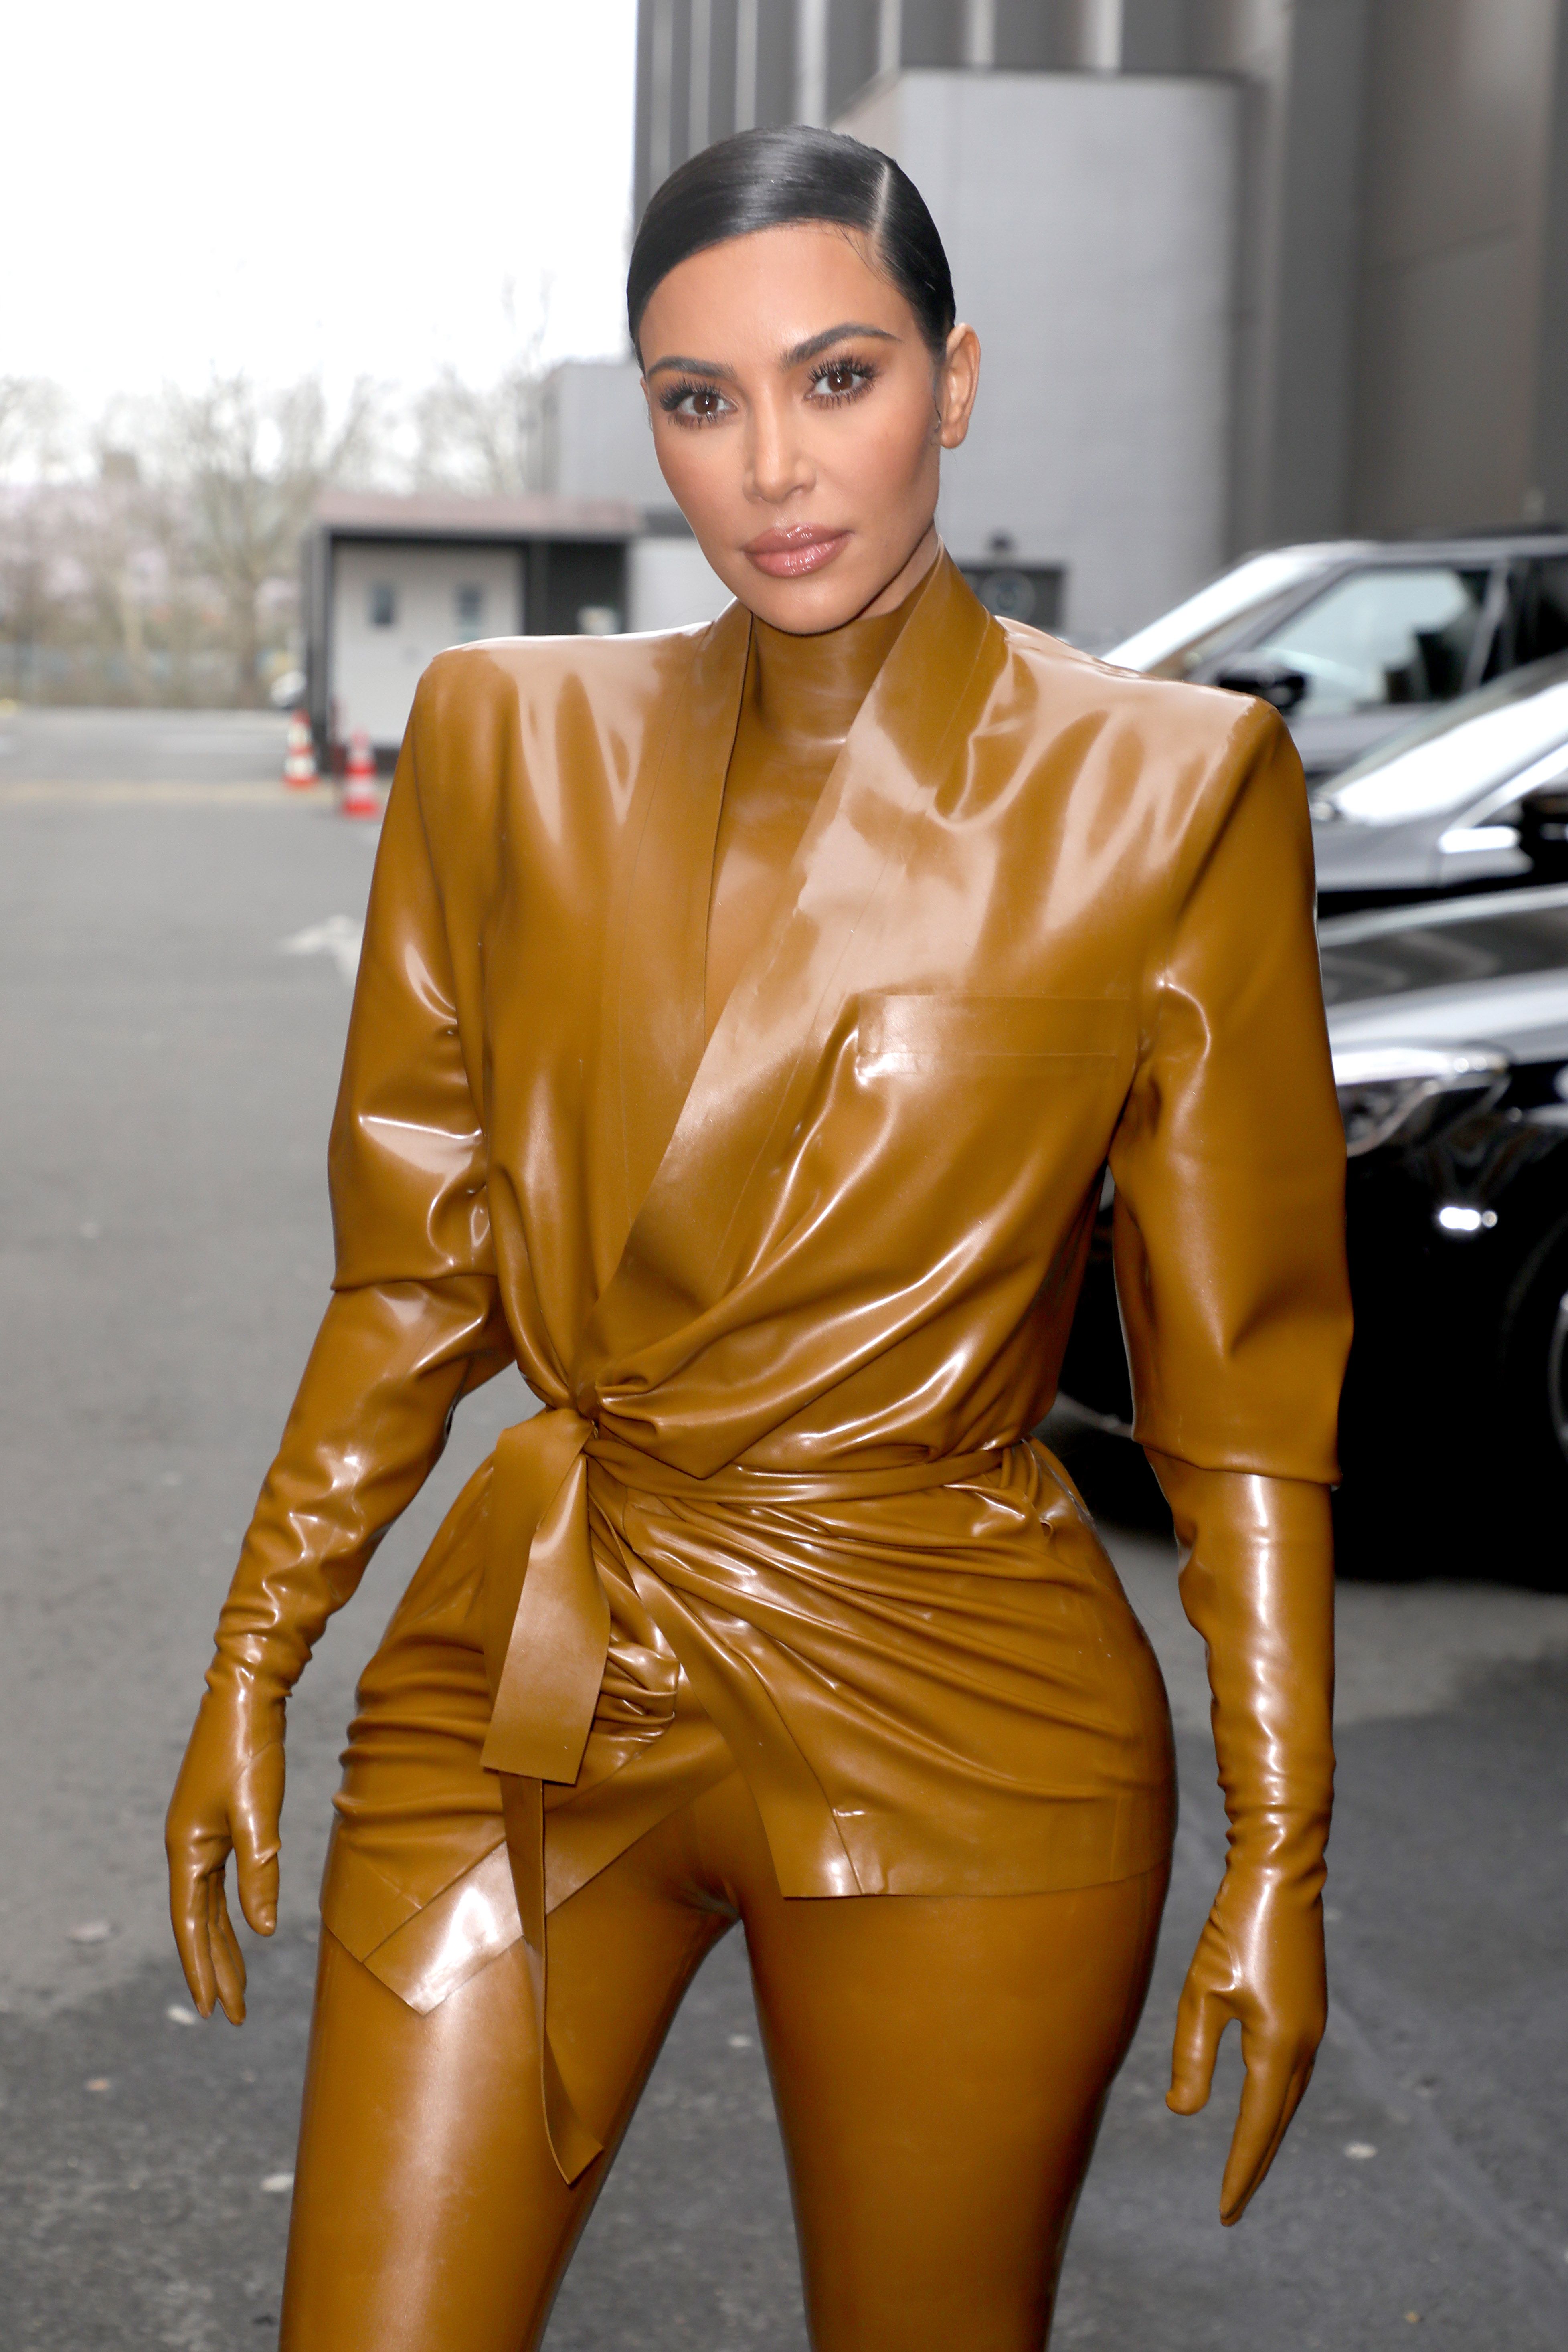 Kim Kardashian Is Oiled Up in Leather for New Skims Campaign